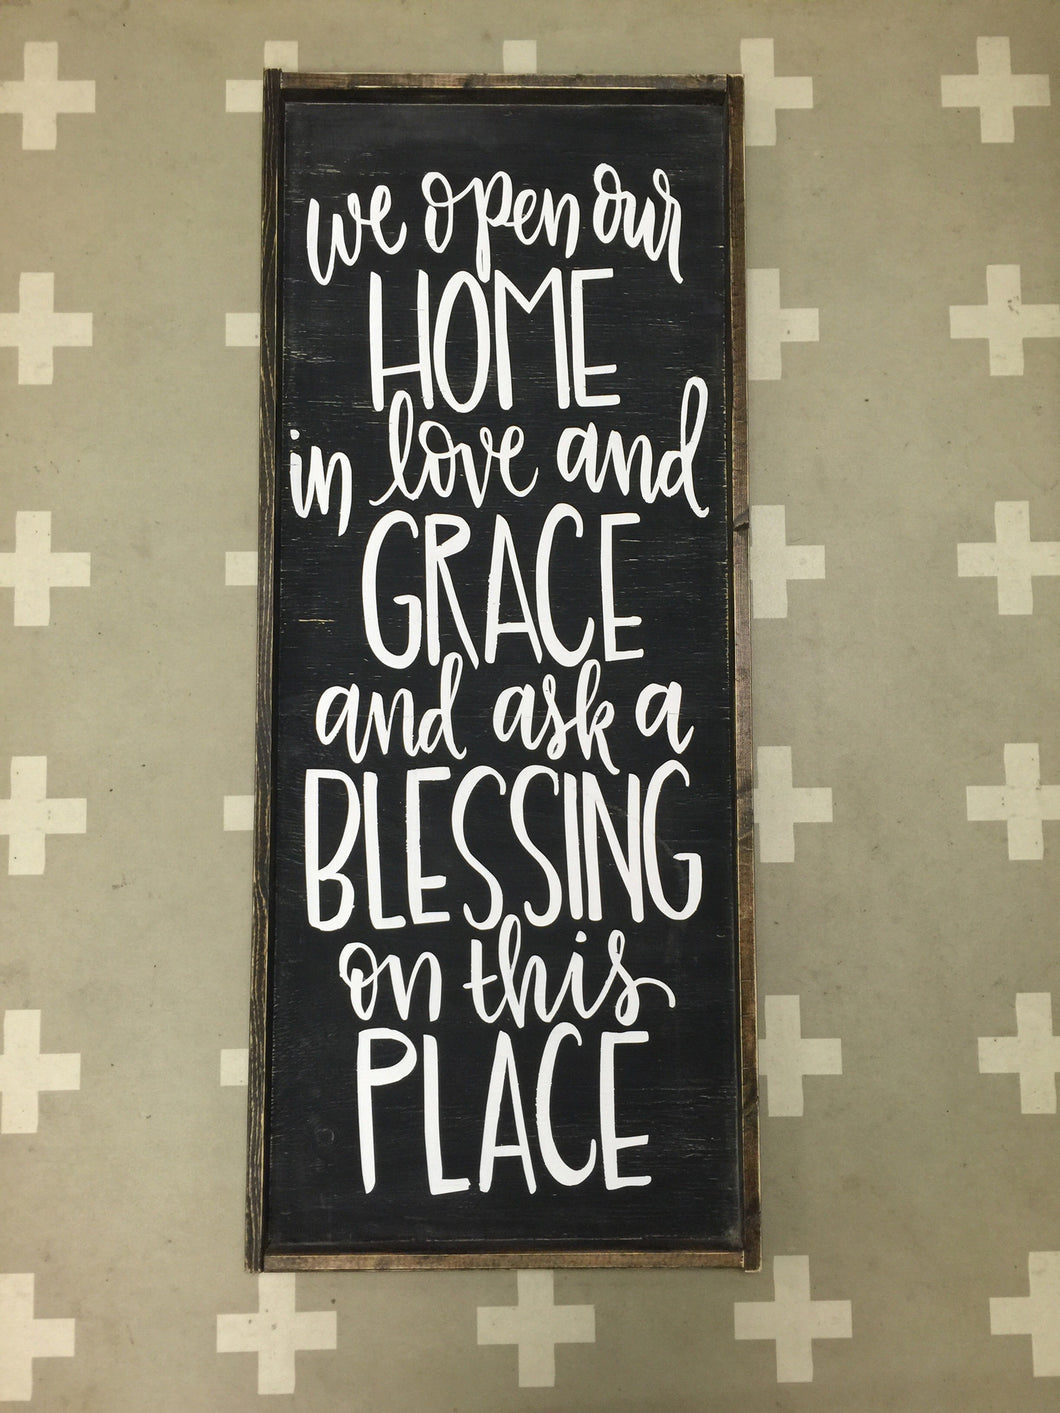 We Open Our Home In Love And Grace